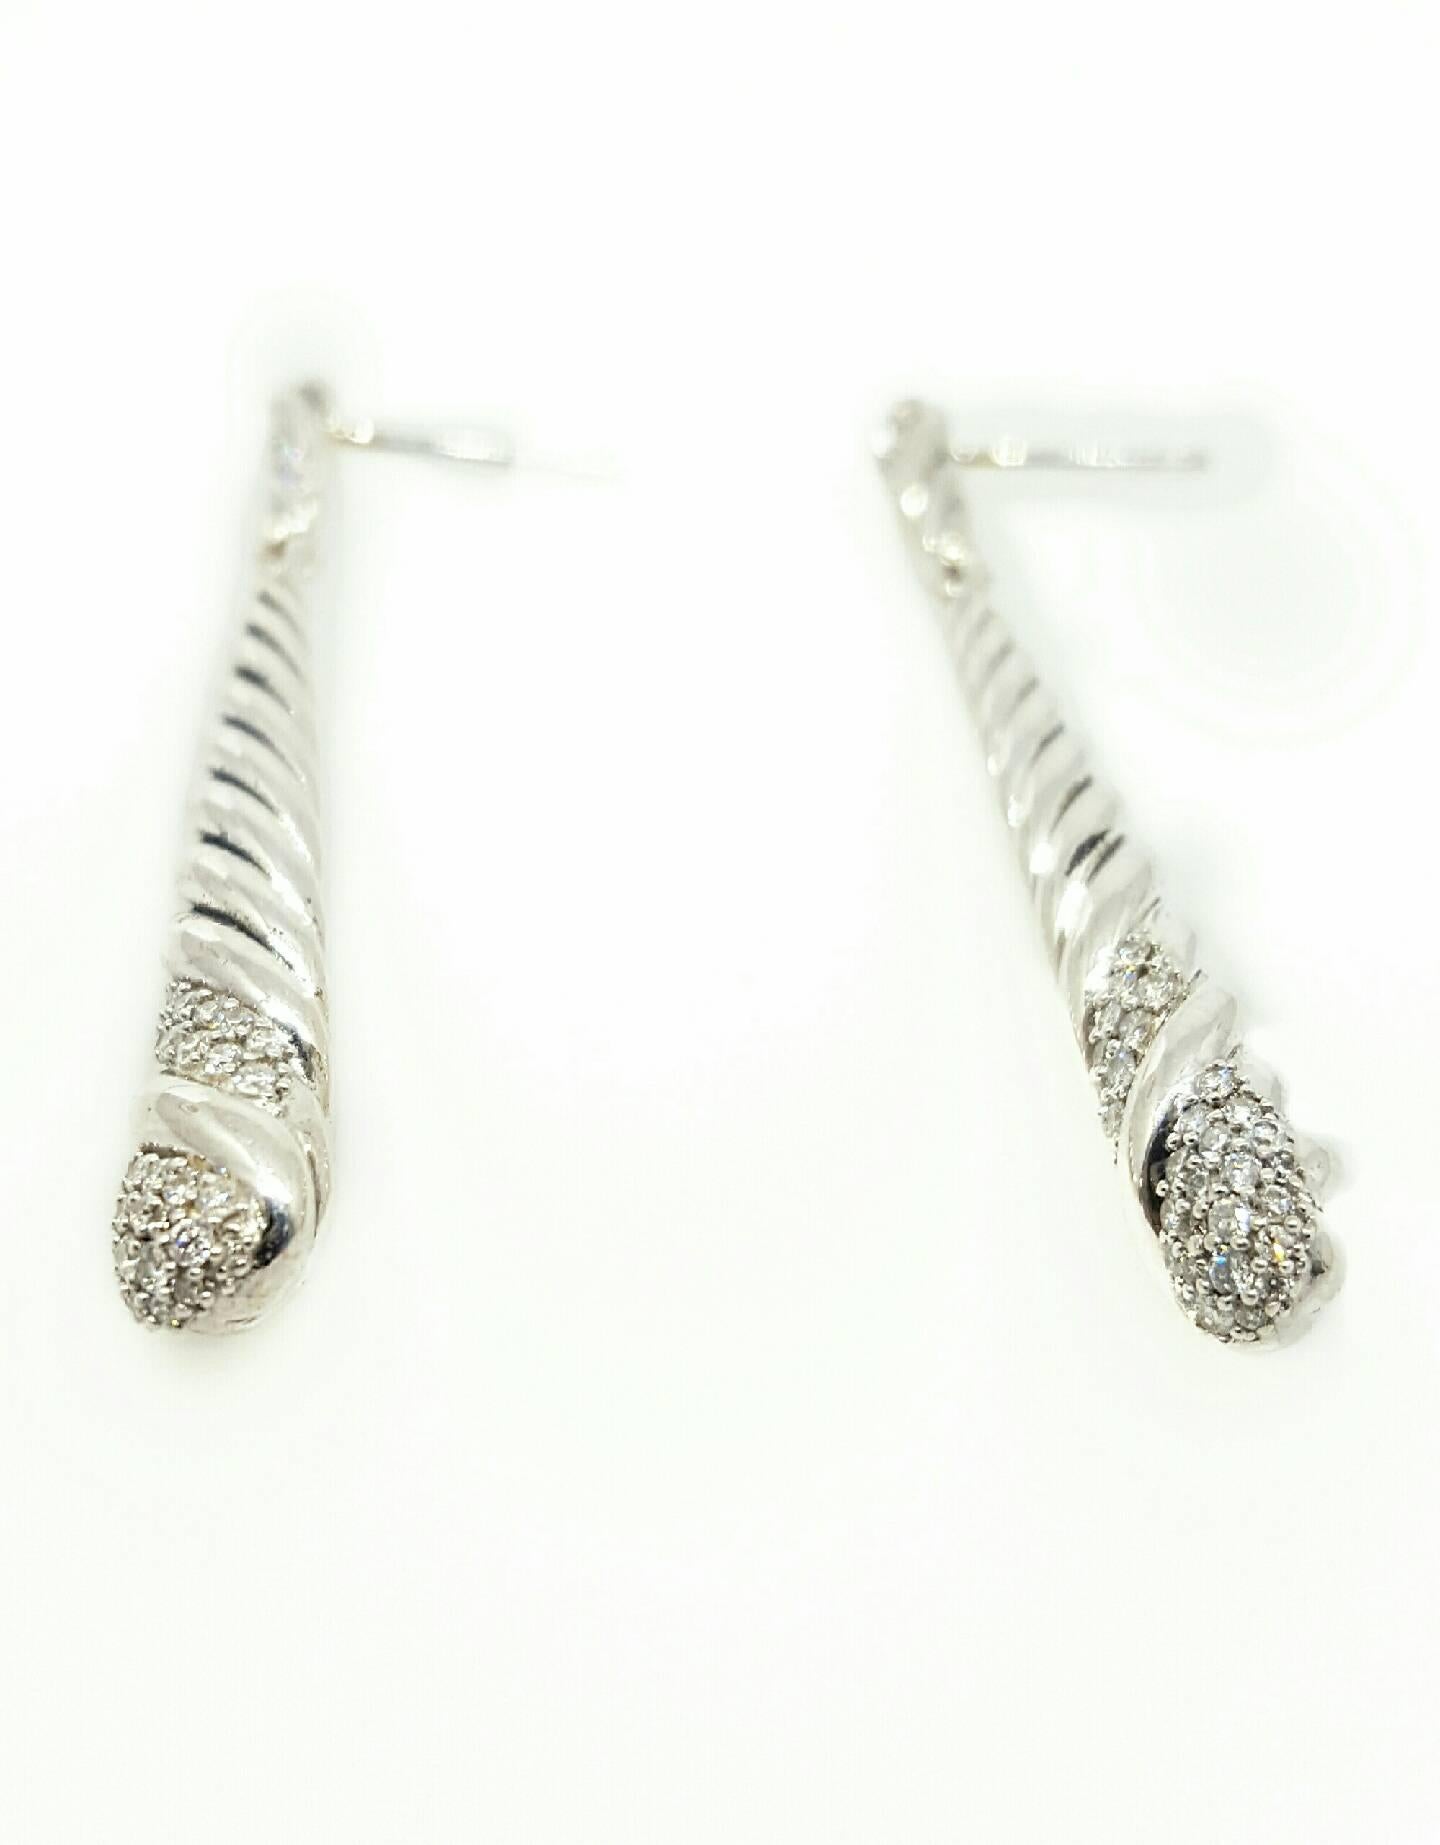 David Yurman Sterling Silver Cable style earrings featuring pave set diamonds. The diamonds have a total weight of 0.44cttw. The earrings are 48mm long and feature friction back posts. Both earrings and backs are stamped sterling silver and DY